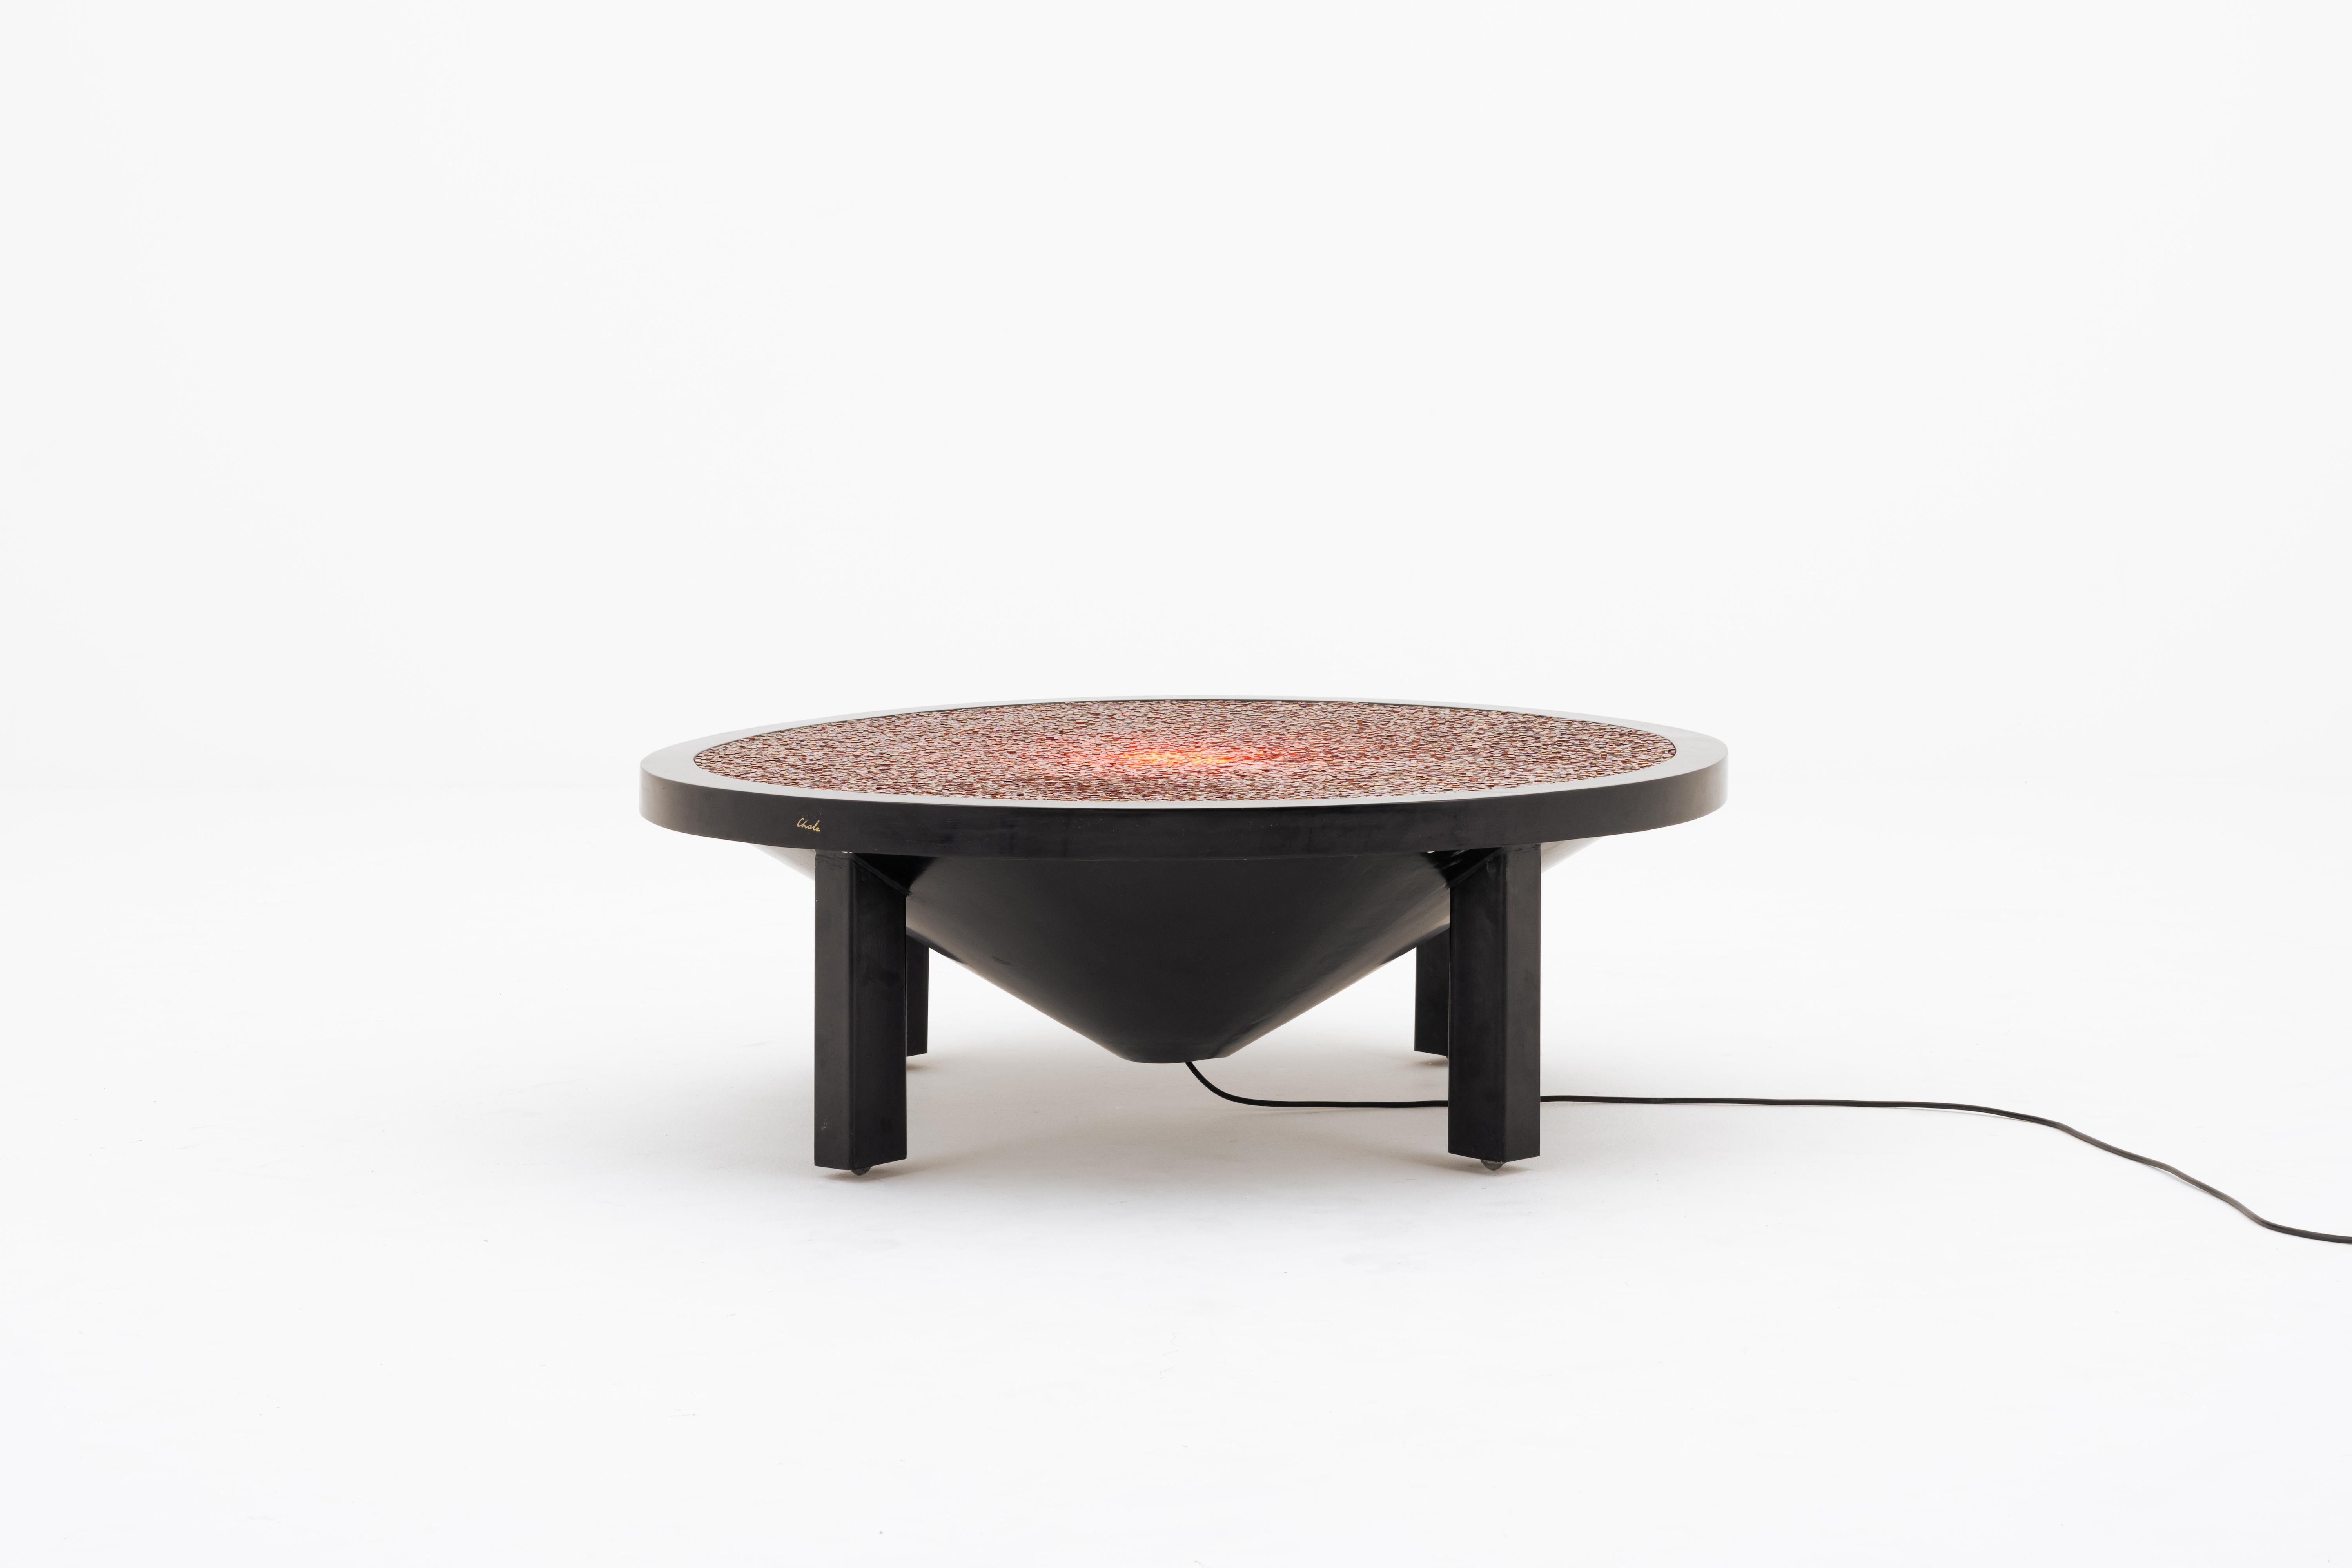 Ado Chale
‘‘Pastilles’’ illuminated coffee table, 1983 
Mosaic of cornaline agate stones and resin

H. 35 x 150ø cm

Son of a woodworker, Ado Chale spent his formative years in the Belgian countryside and began working with metal at a young age,